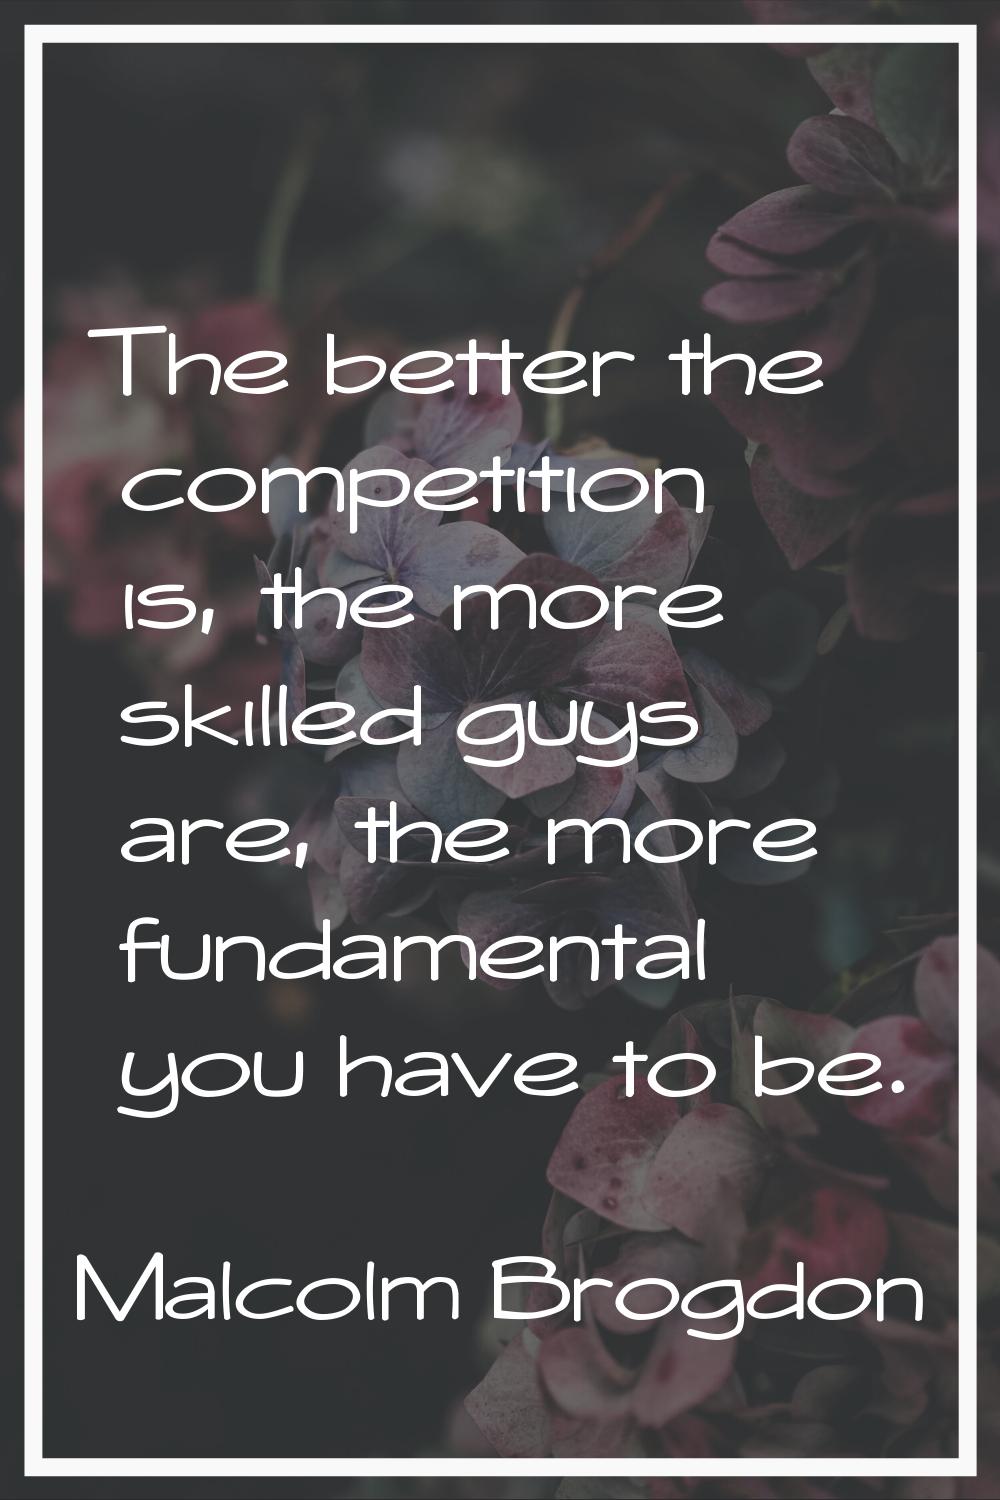 The better the competition is, the more skilled guys are, the more fundamental you have to be.